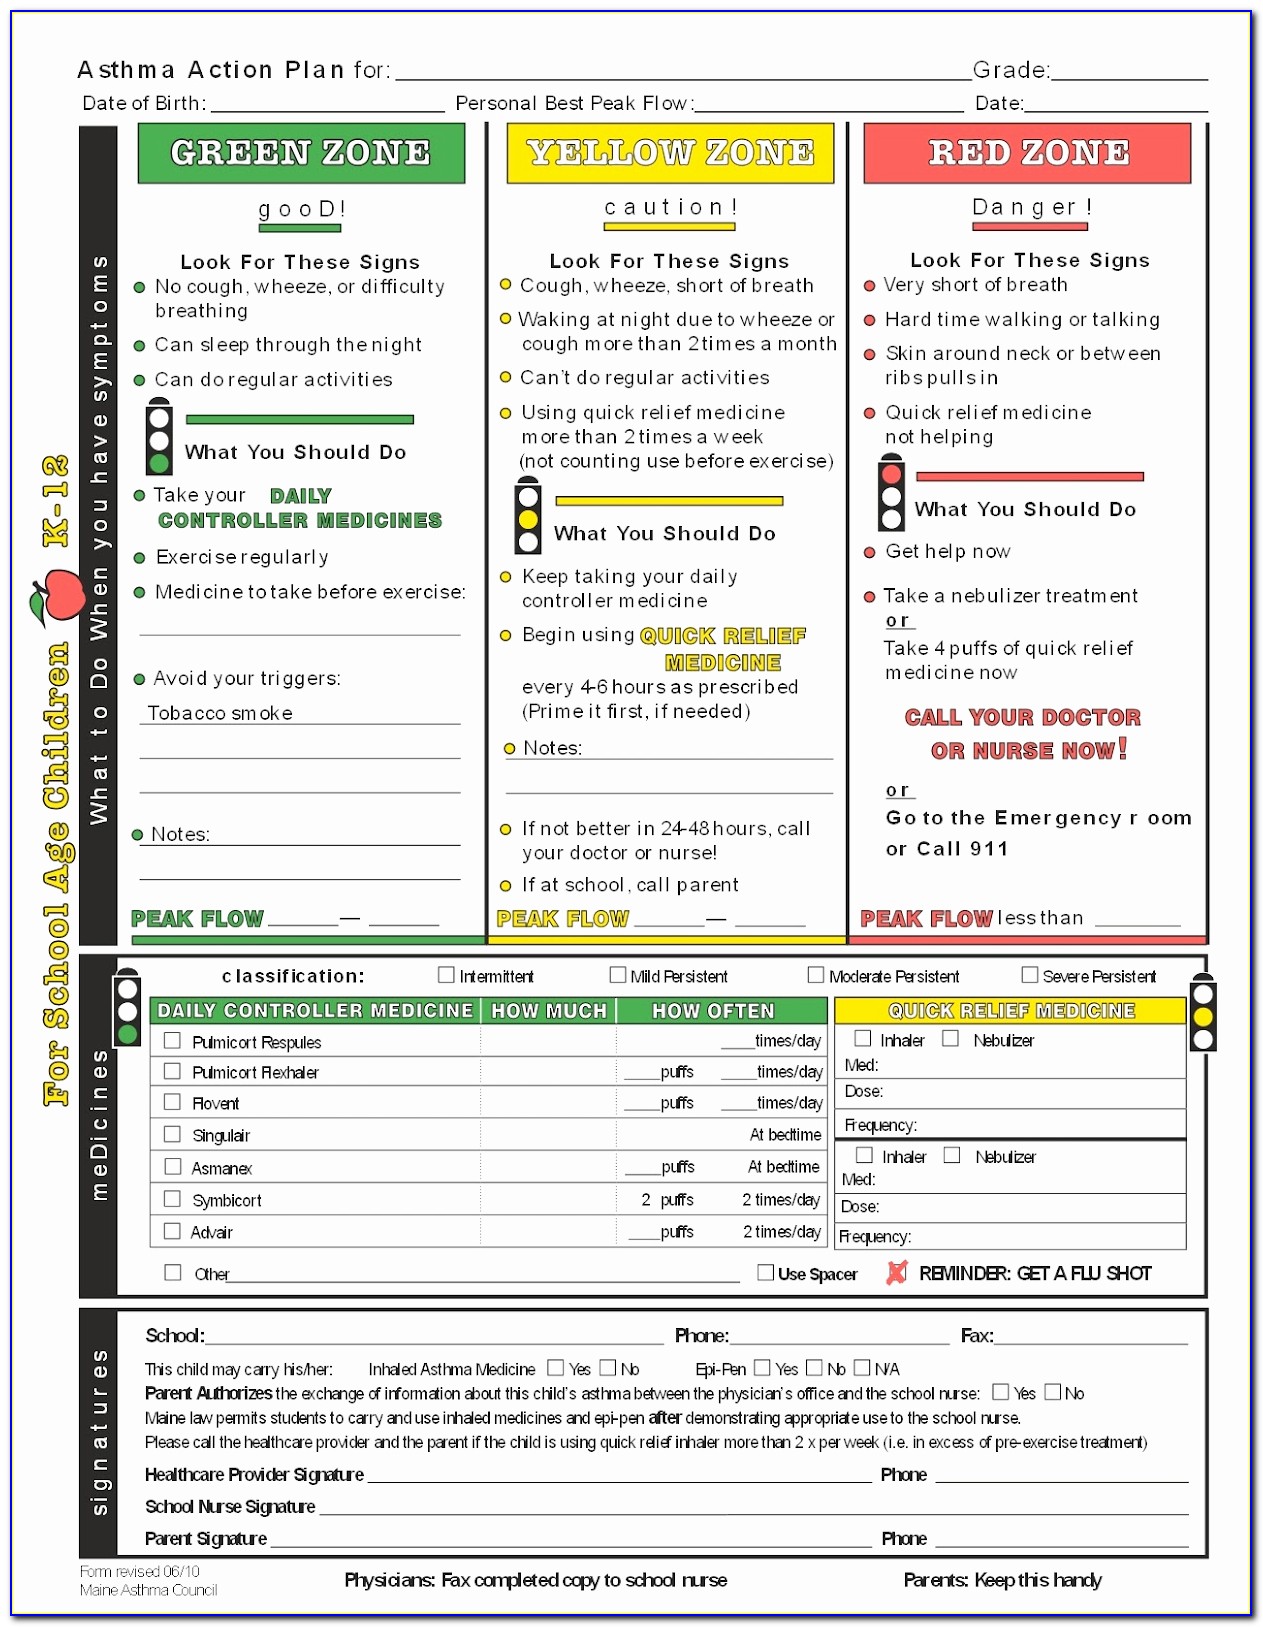 Asthma Action Plan Form For School